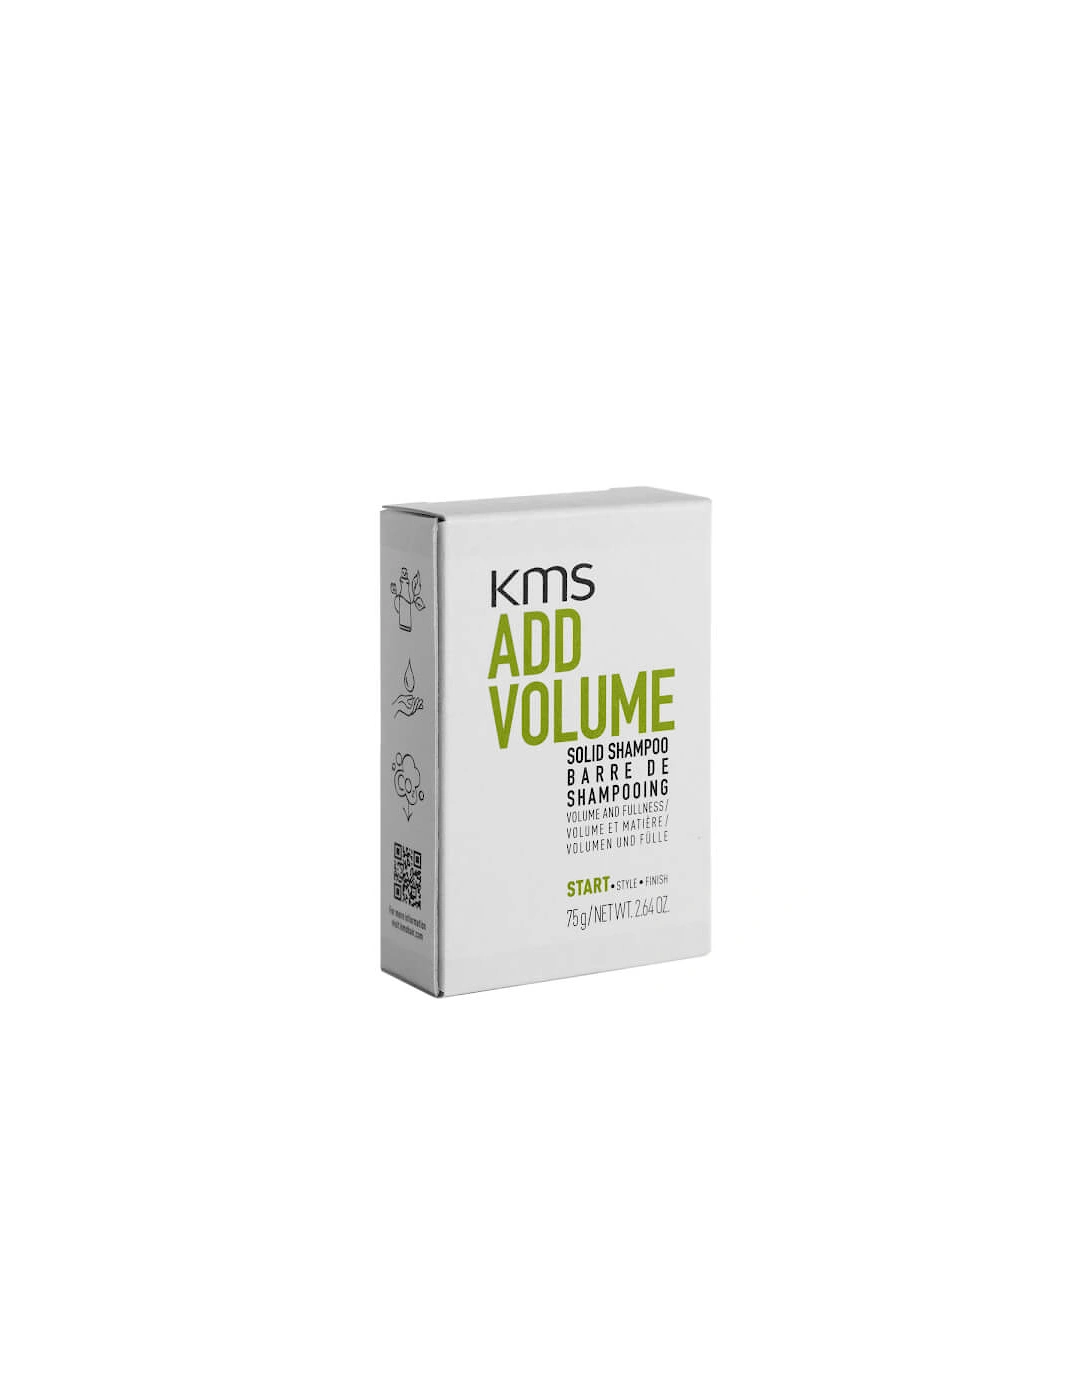 Add Volume Solid Shampoo 75g - KMS, 2 of 1